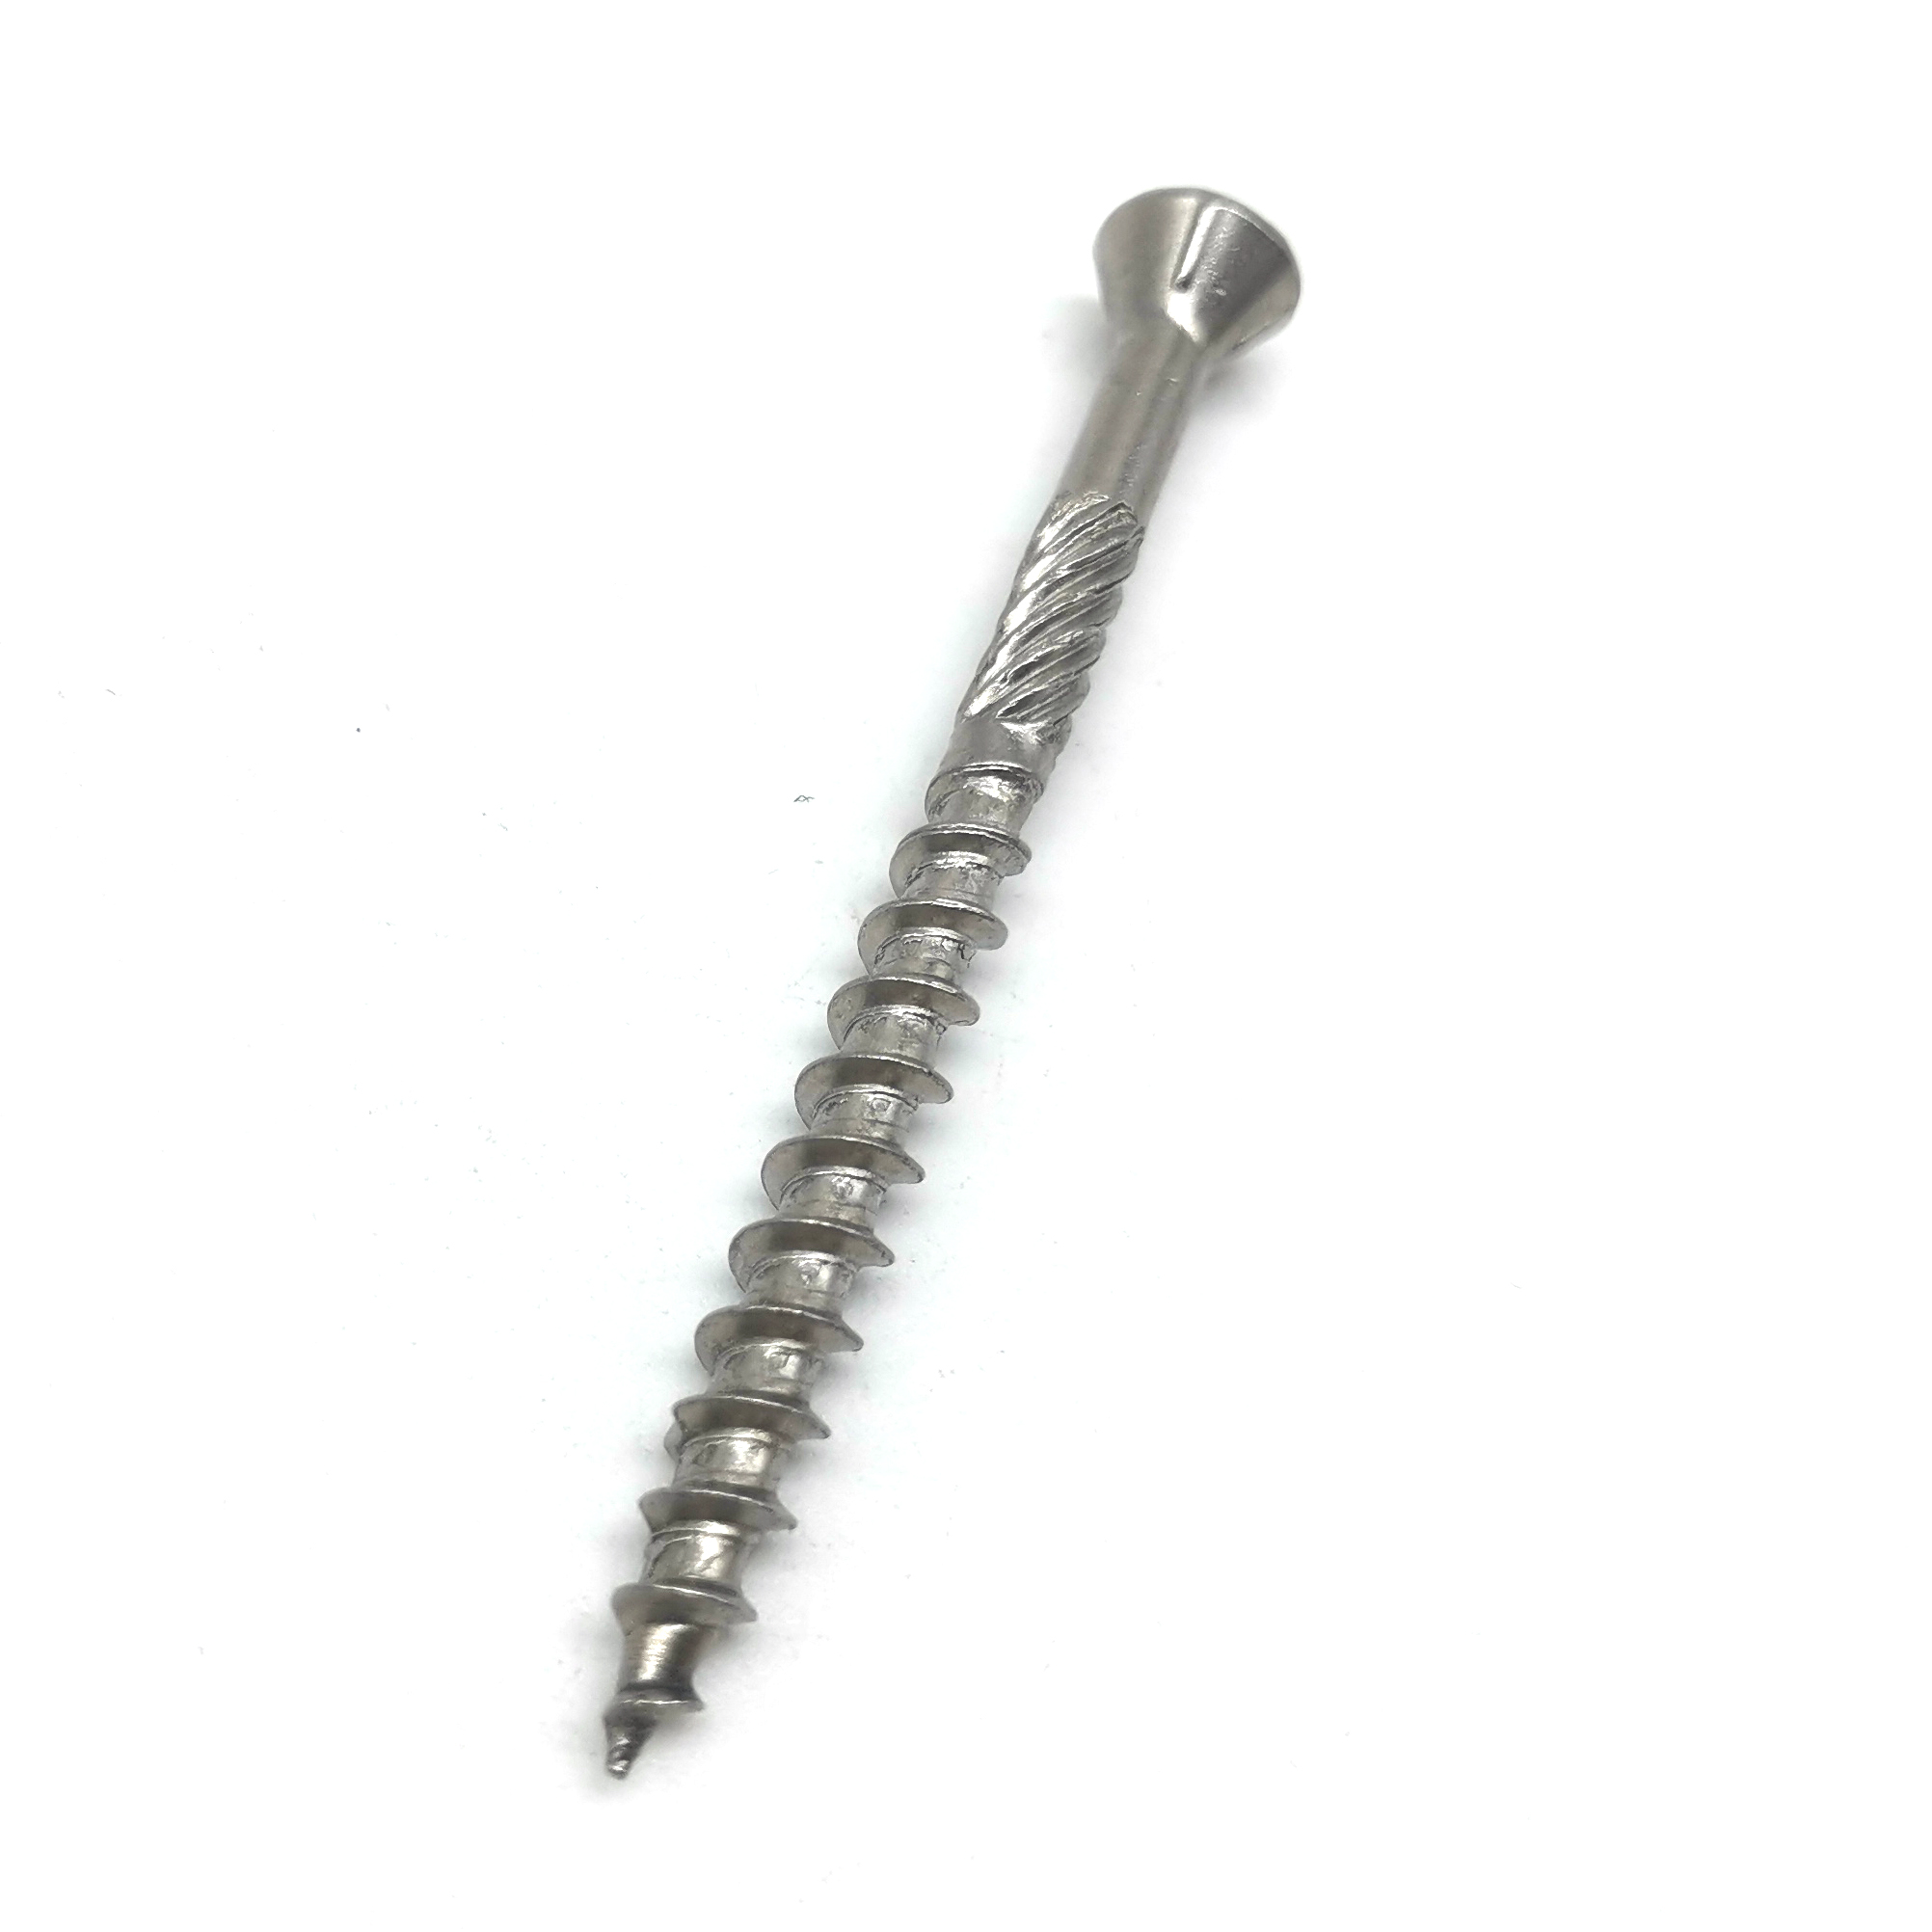 Stainless Steel Lag Grub Set Wafer Head Phillip Drive Self Tapping Screw